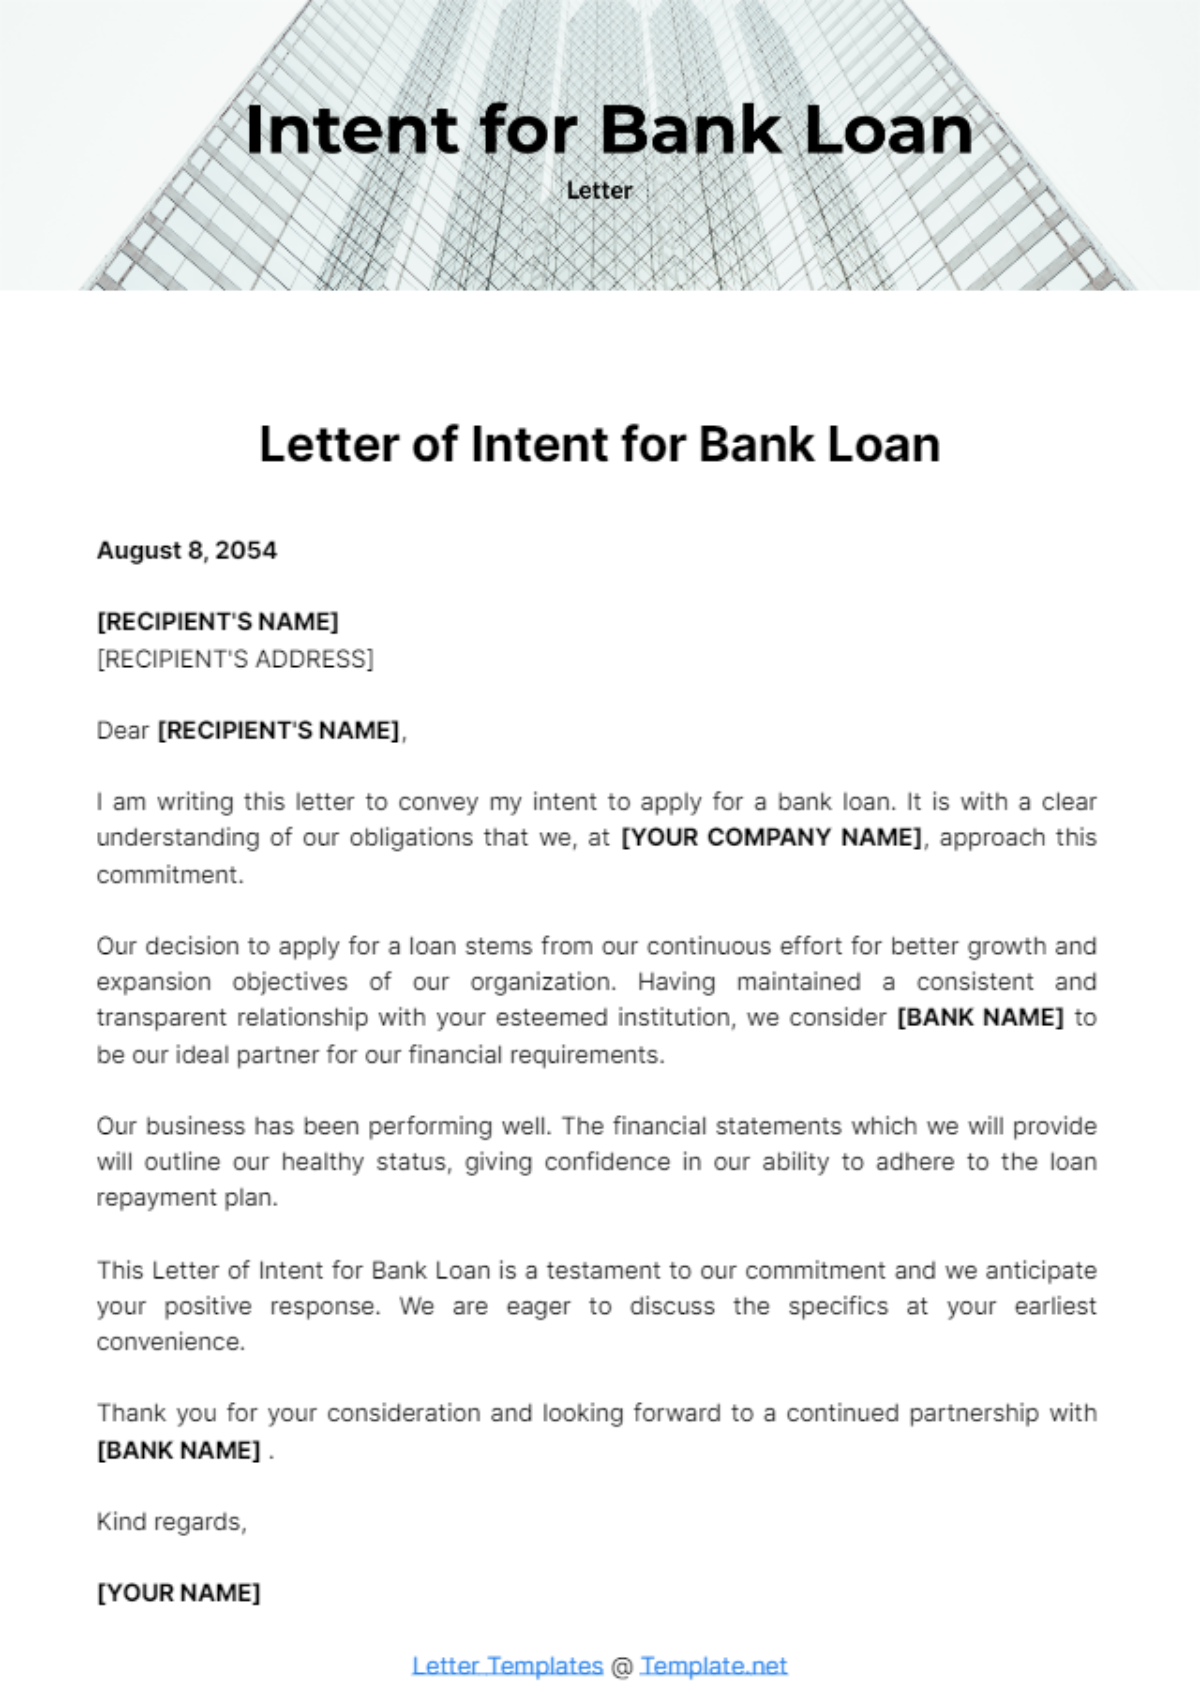 Letter of Intent for Bank Loan Template